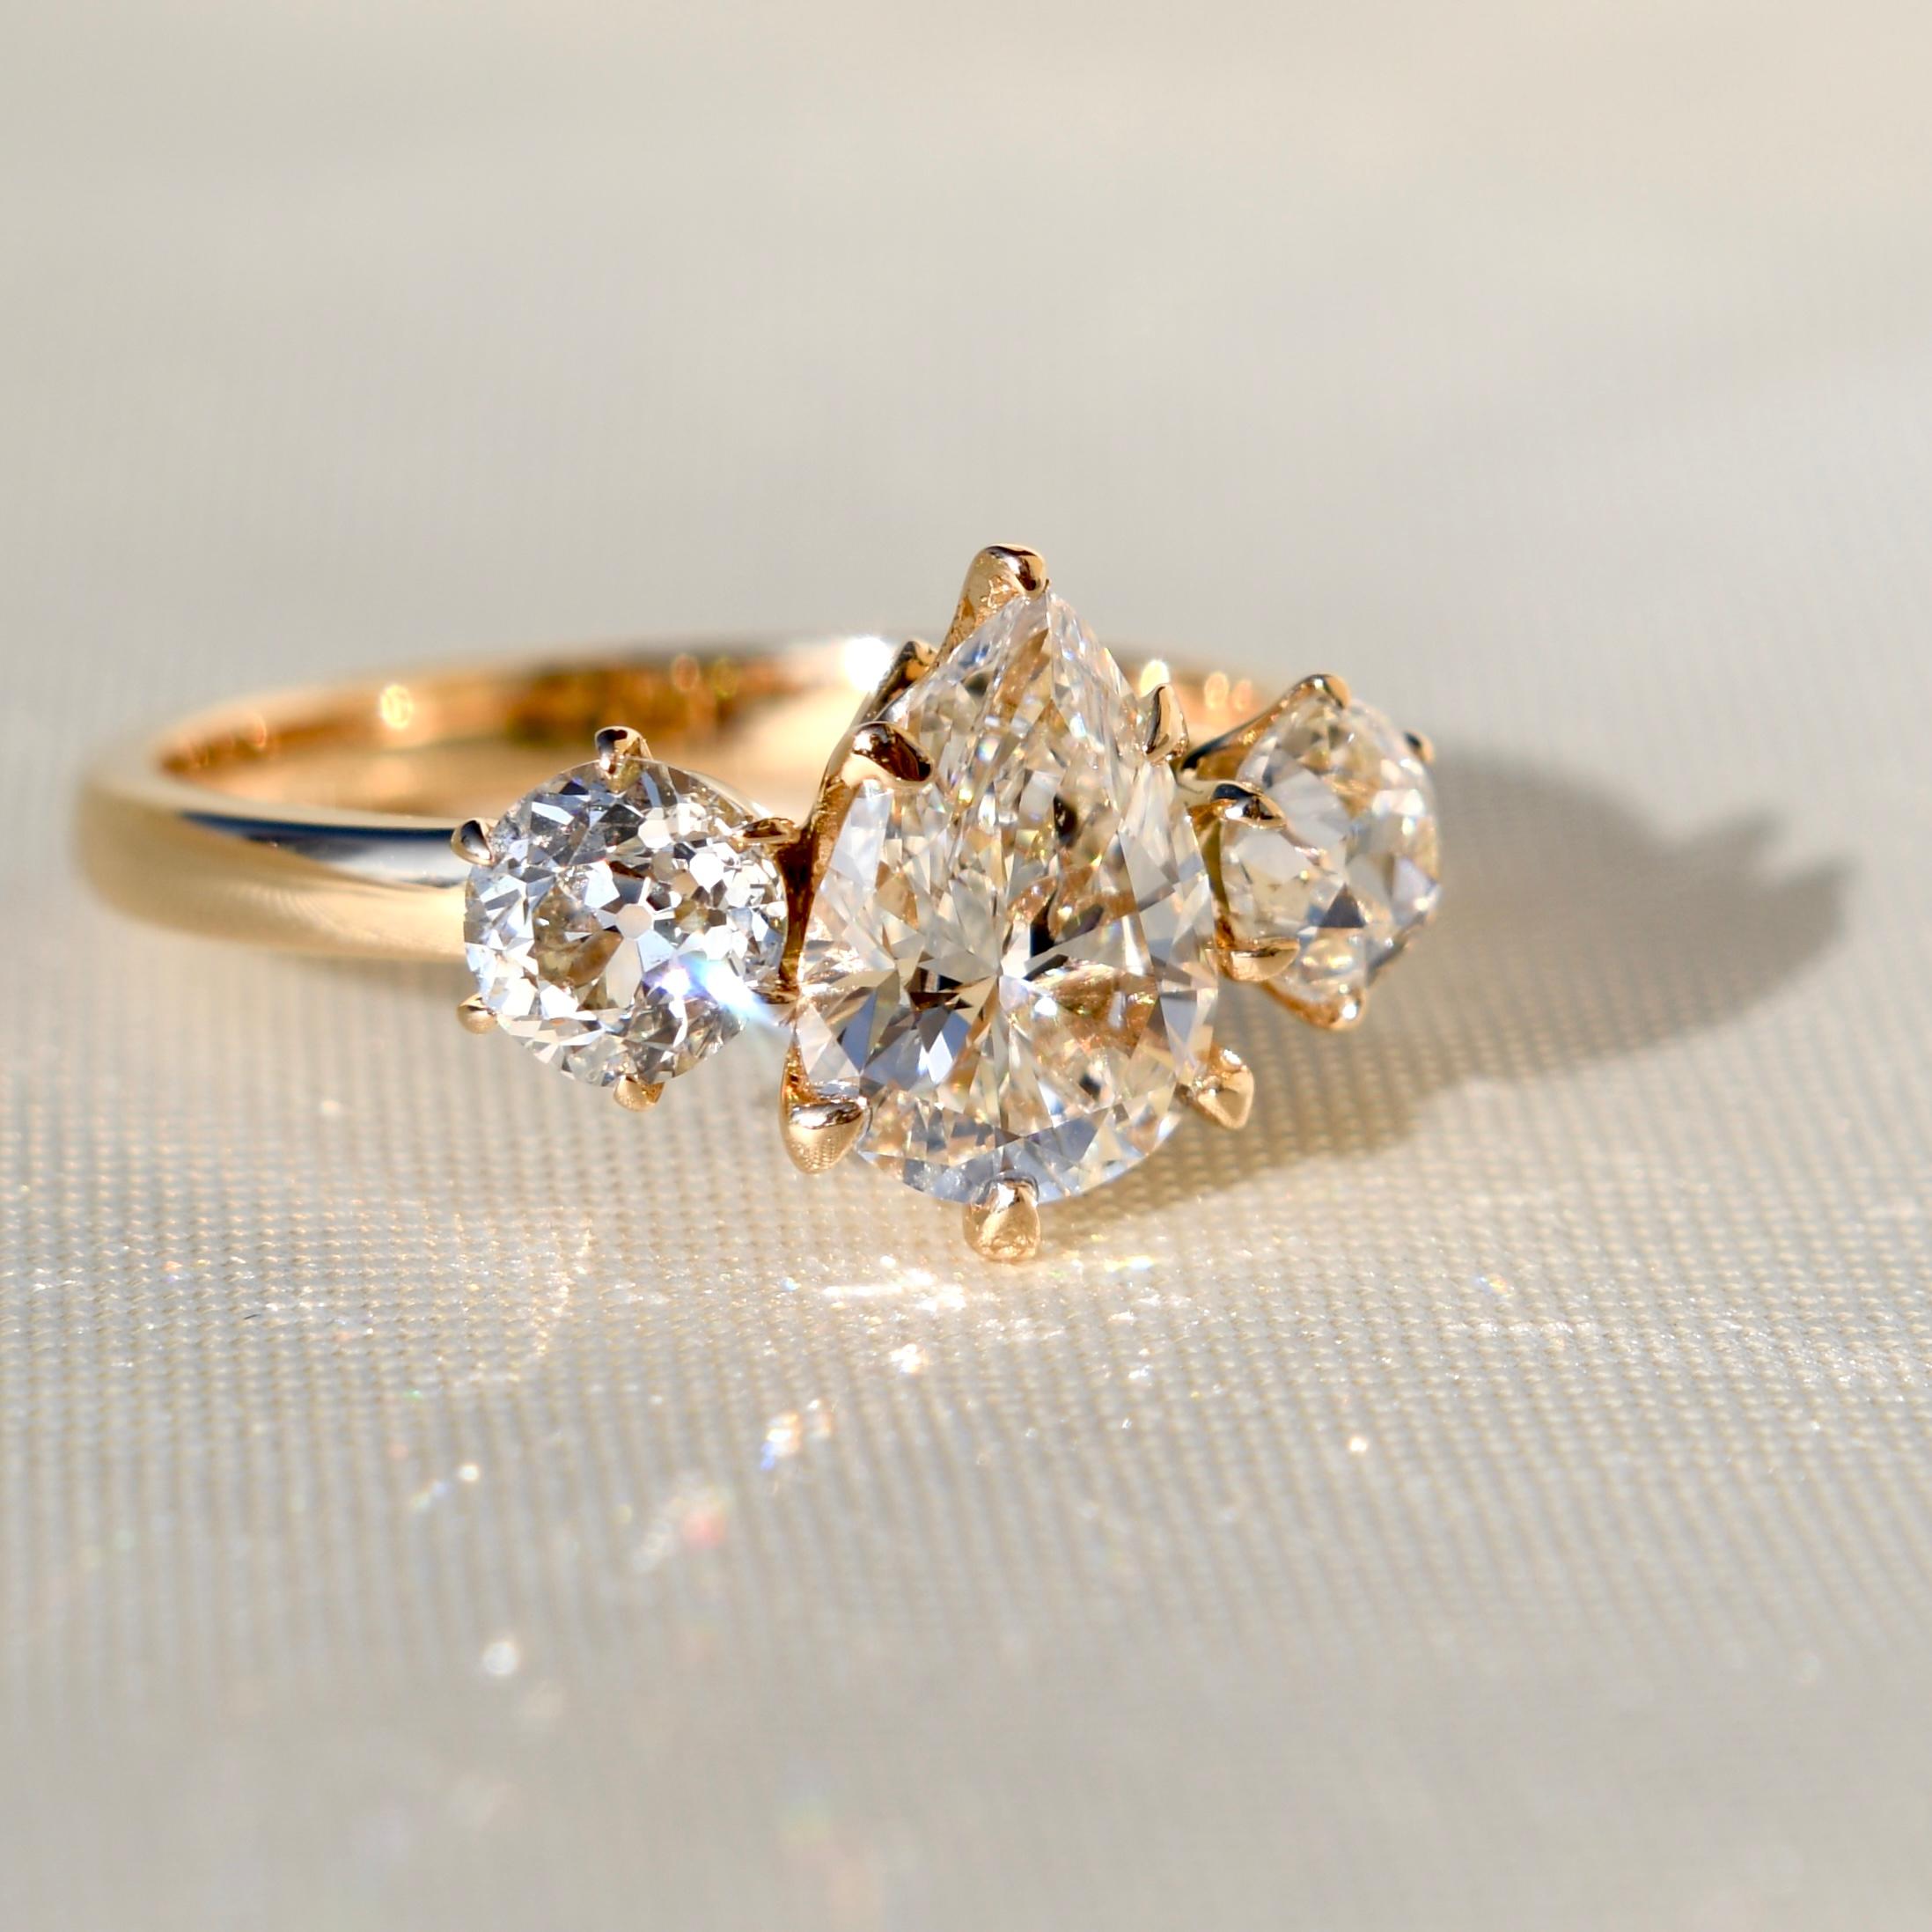 This ring was newly made by Beaubijouxantique.

The diamonds are vintage and antique.

- One pear cut diamond, 1.19 ct (H/ SI1, GIA: 6462272338)
- One old European cut diamond, 0.40 ct (I/ SI2, GIA: 2467302809)
- One old European cut diamond, 0.45